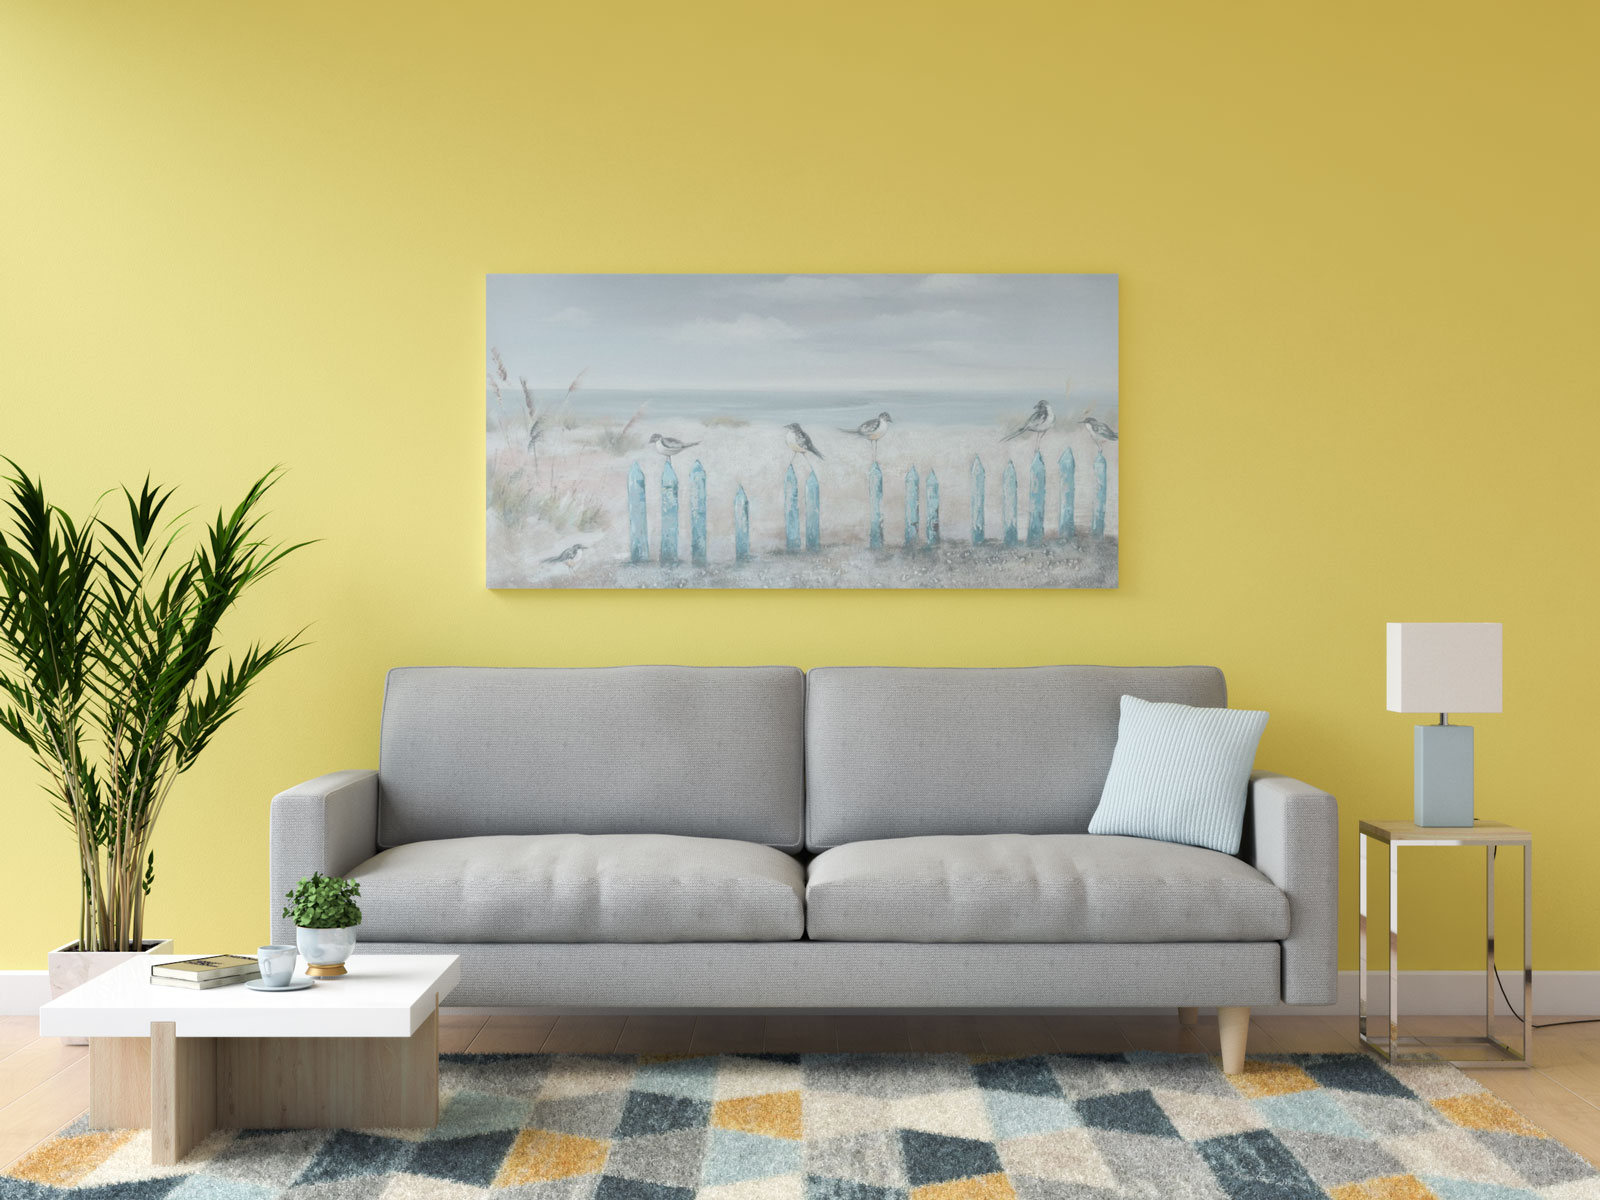 Yellow walls with light blue decoration